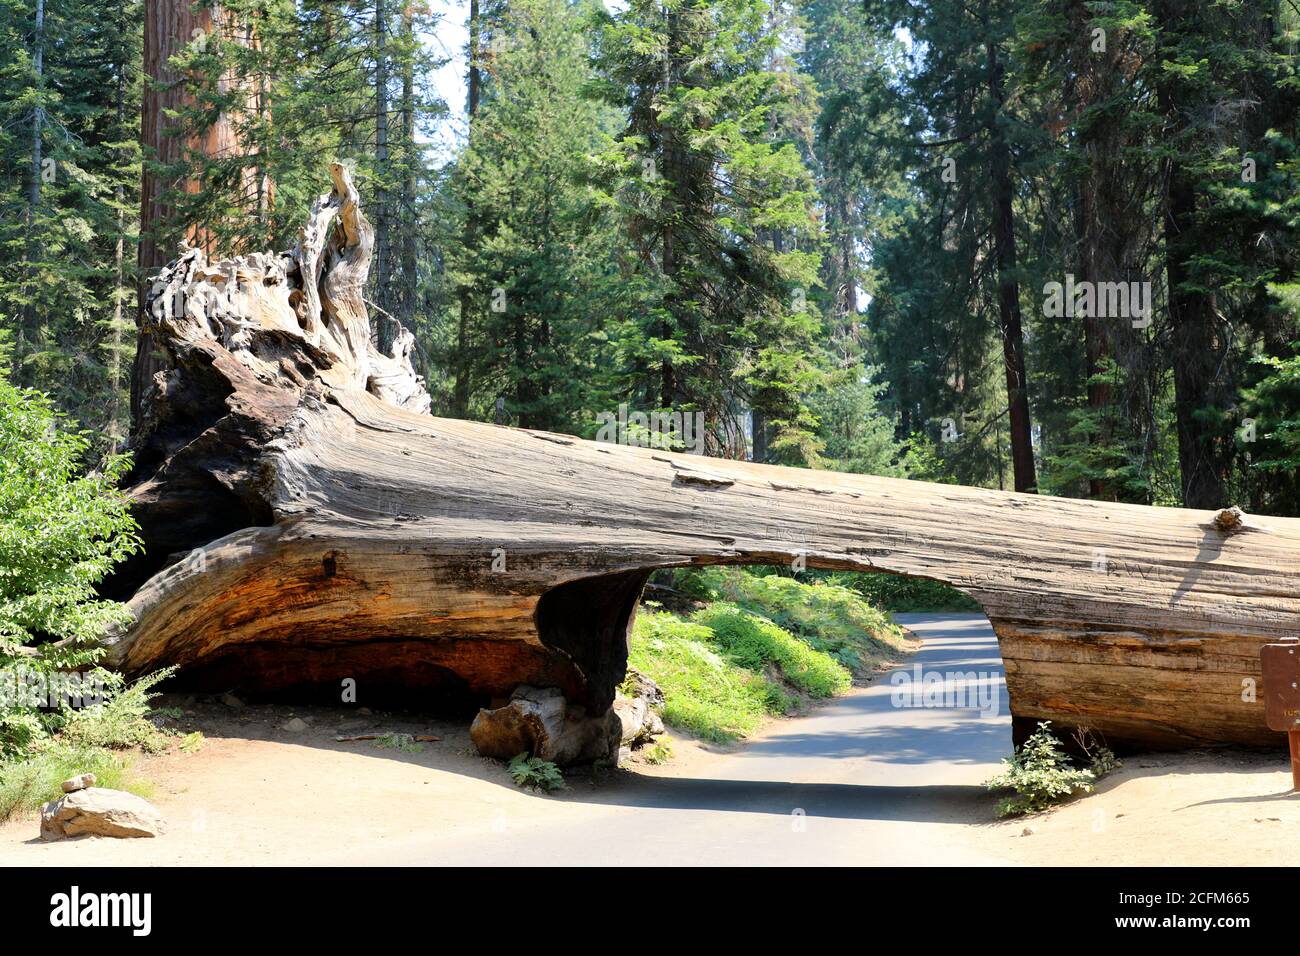 Tunnel Log Giant Tree in Sequoia and Kings Canyon National Park, California, USA Stock Photo